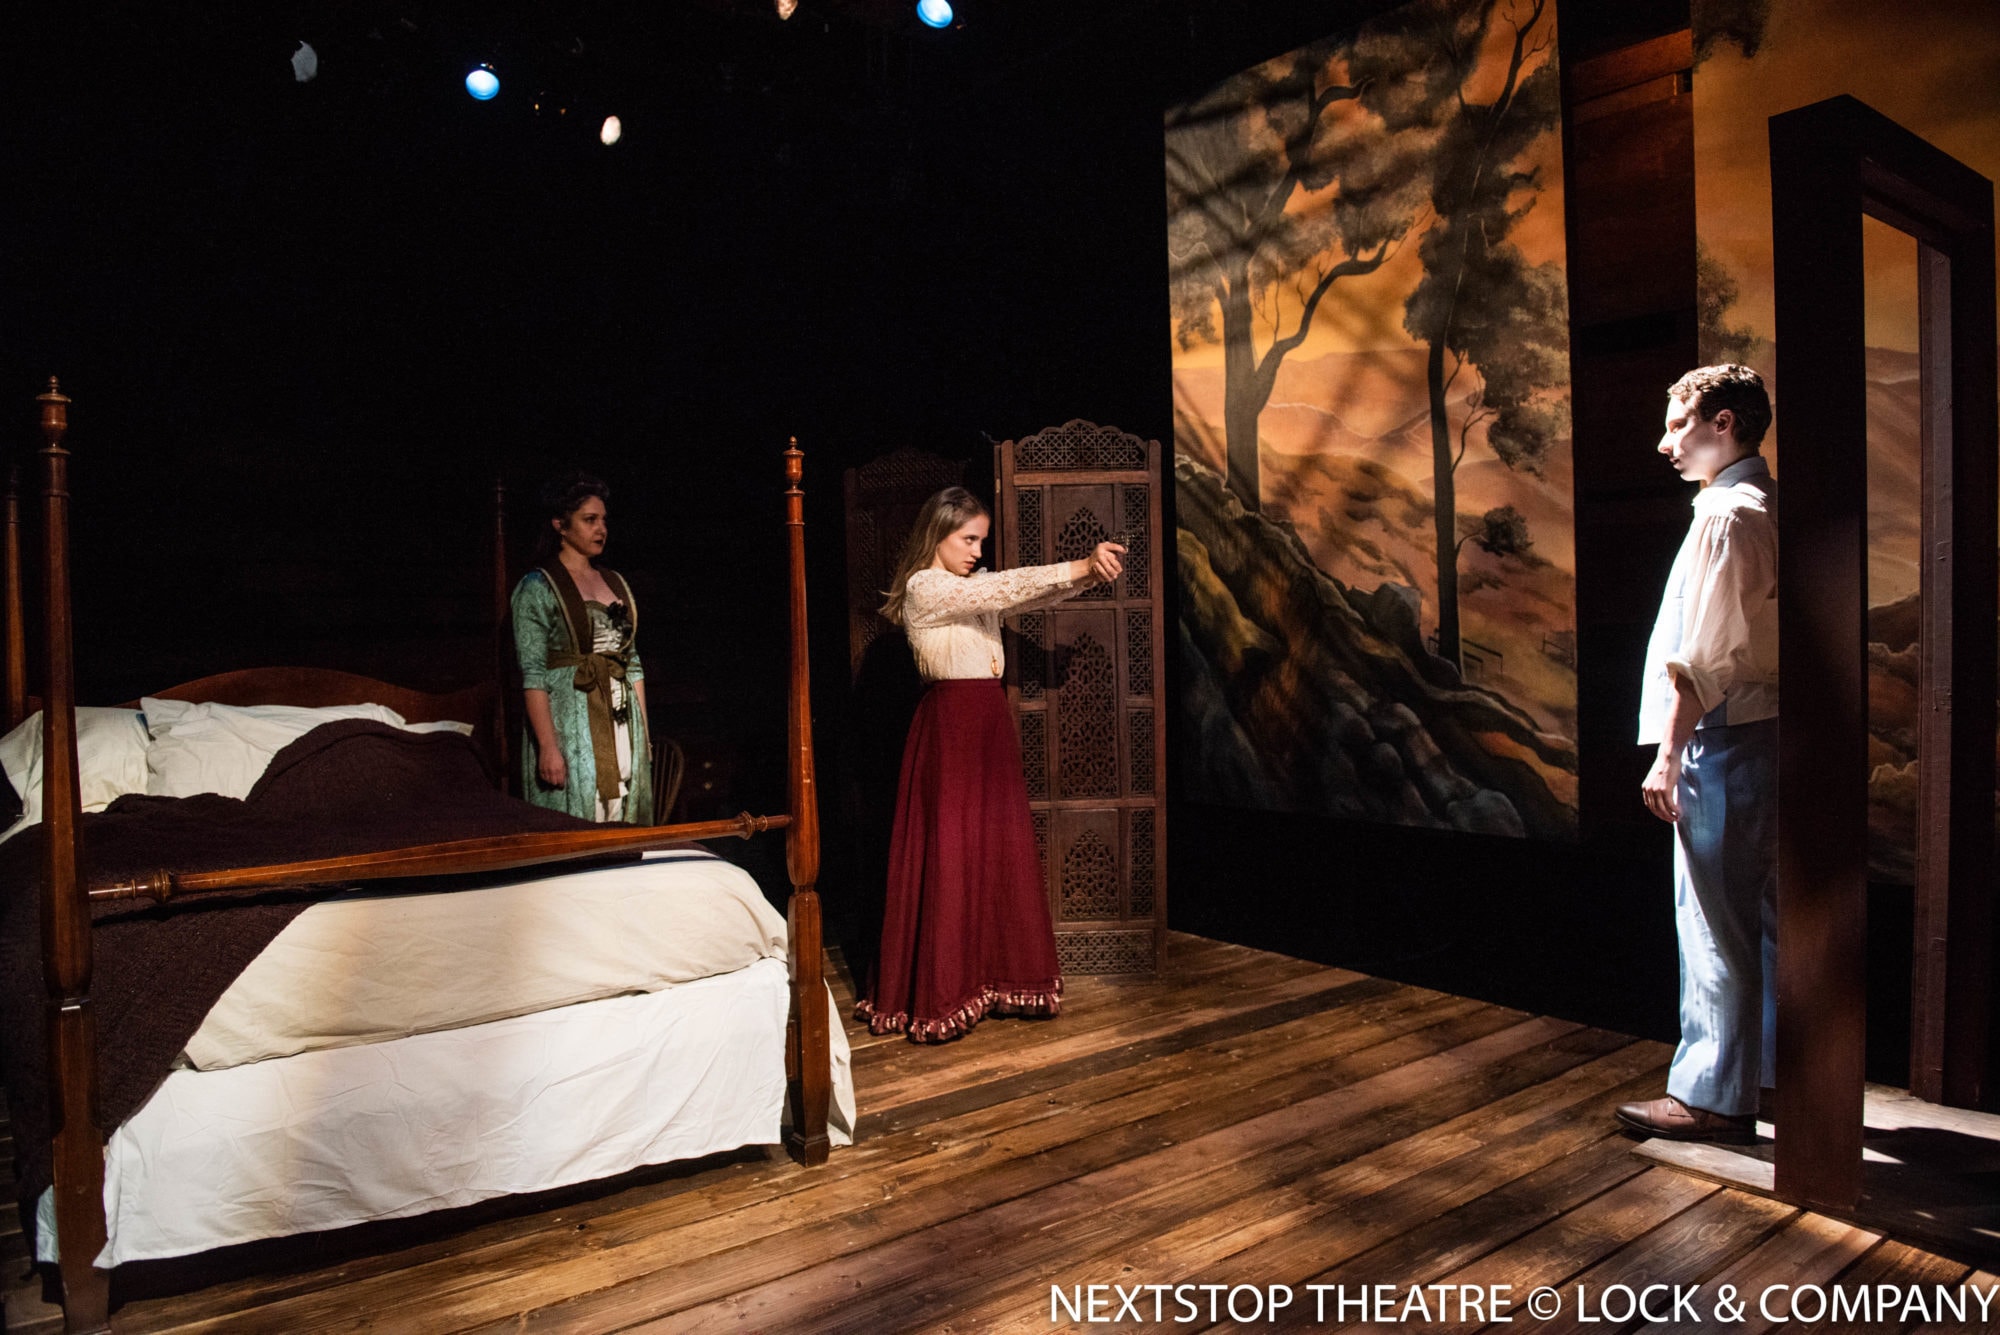 Kari Ginsburg, Annie Ottati and John Sygar in John Steinbeck’s “East of Eden” at NextStop Theatre Company. Photo by Lock and Company.